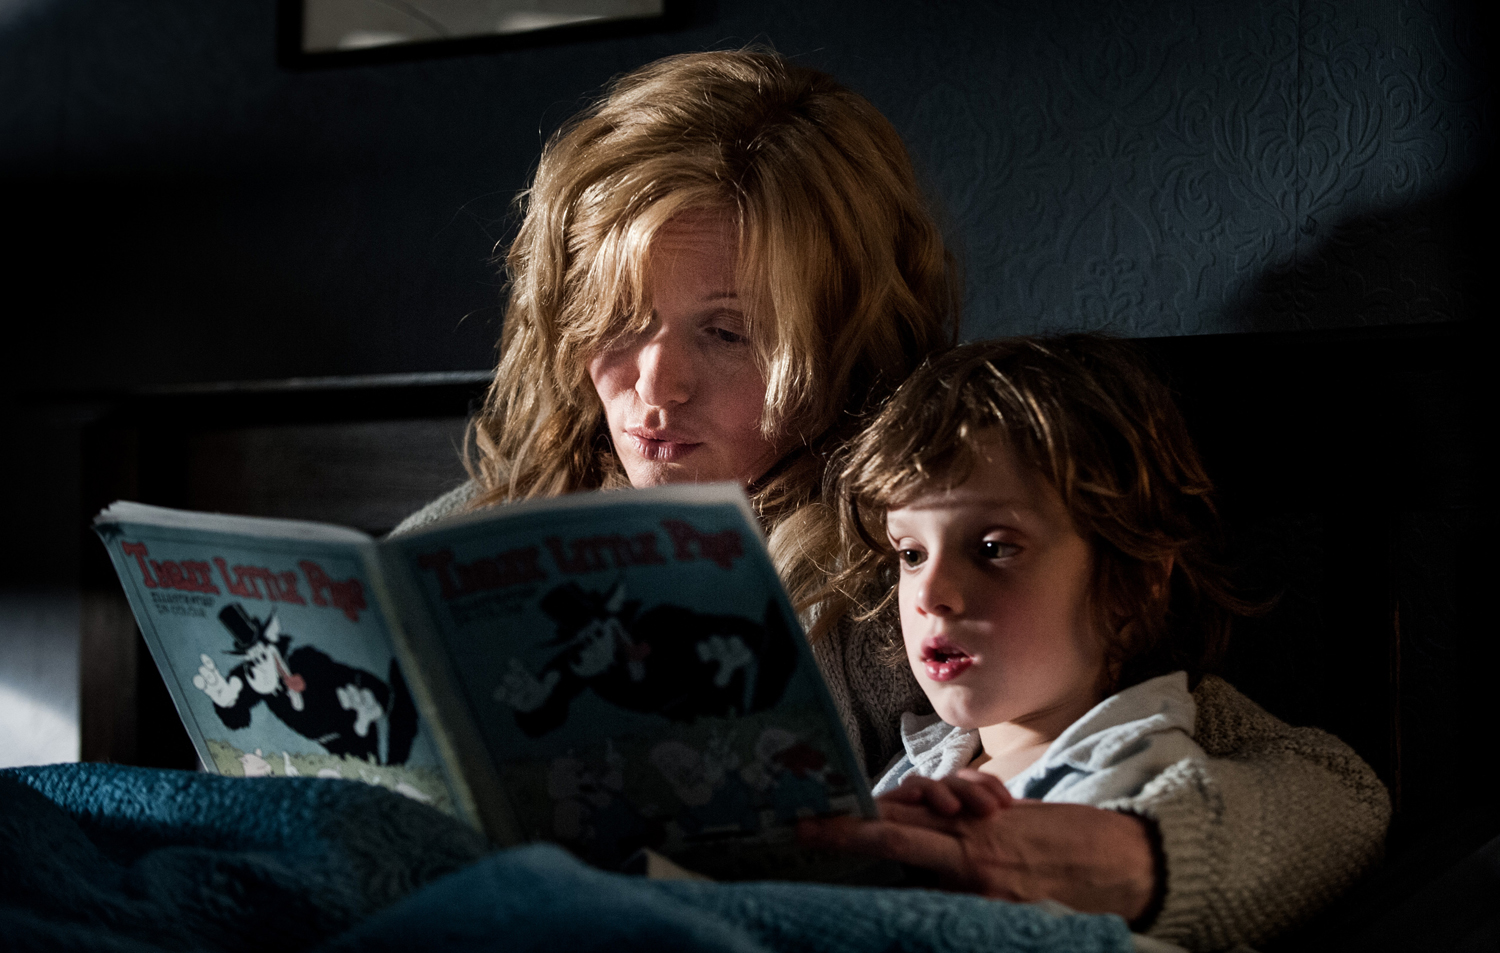 Film Review: “The Babadook”